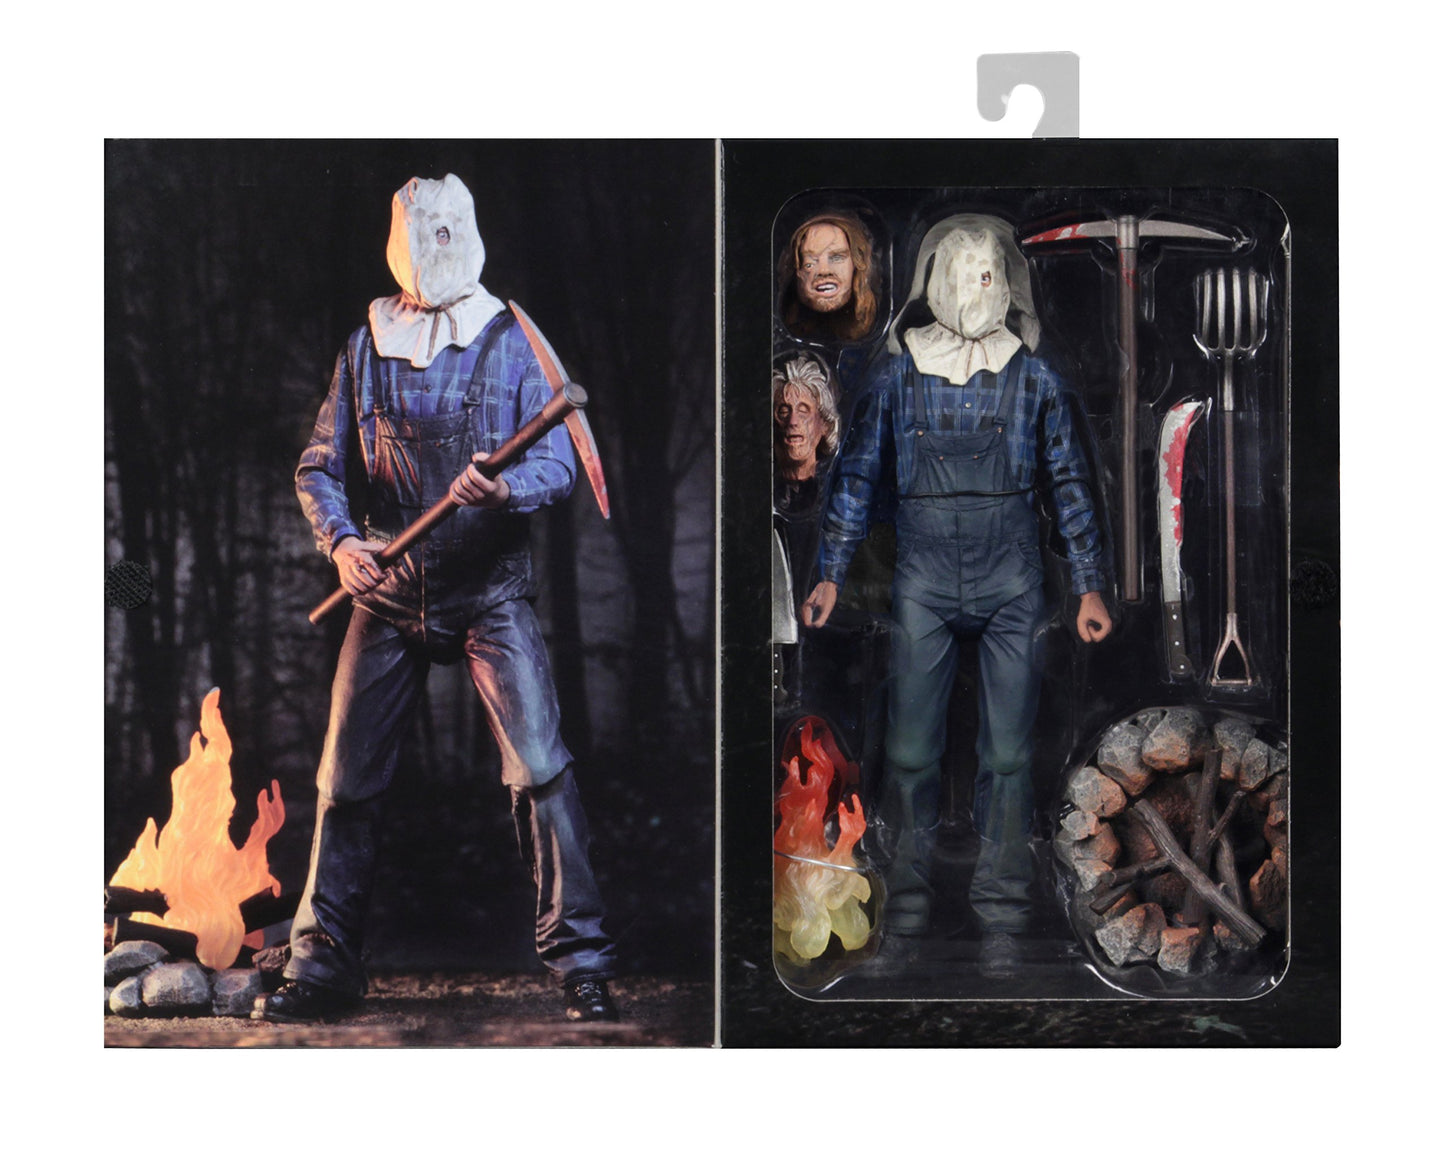 NECA Friday The 13th 7" Scale Action Figure-Ultimate Part 2 Jason